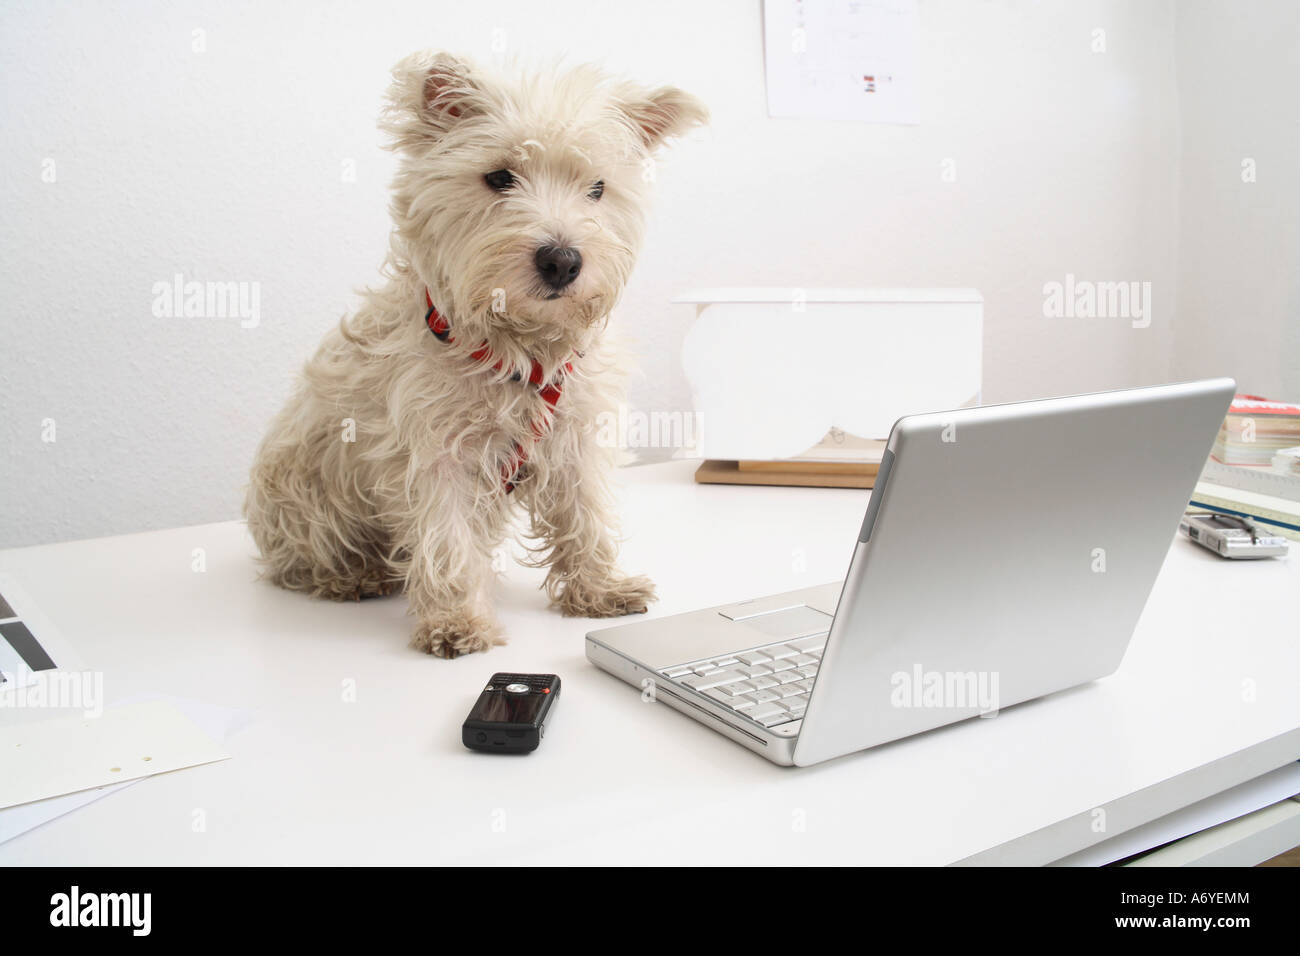 Dog Sitting On Desk In Front Of Laptop Stock Photo 11674003 Alamy